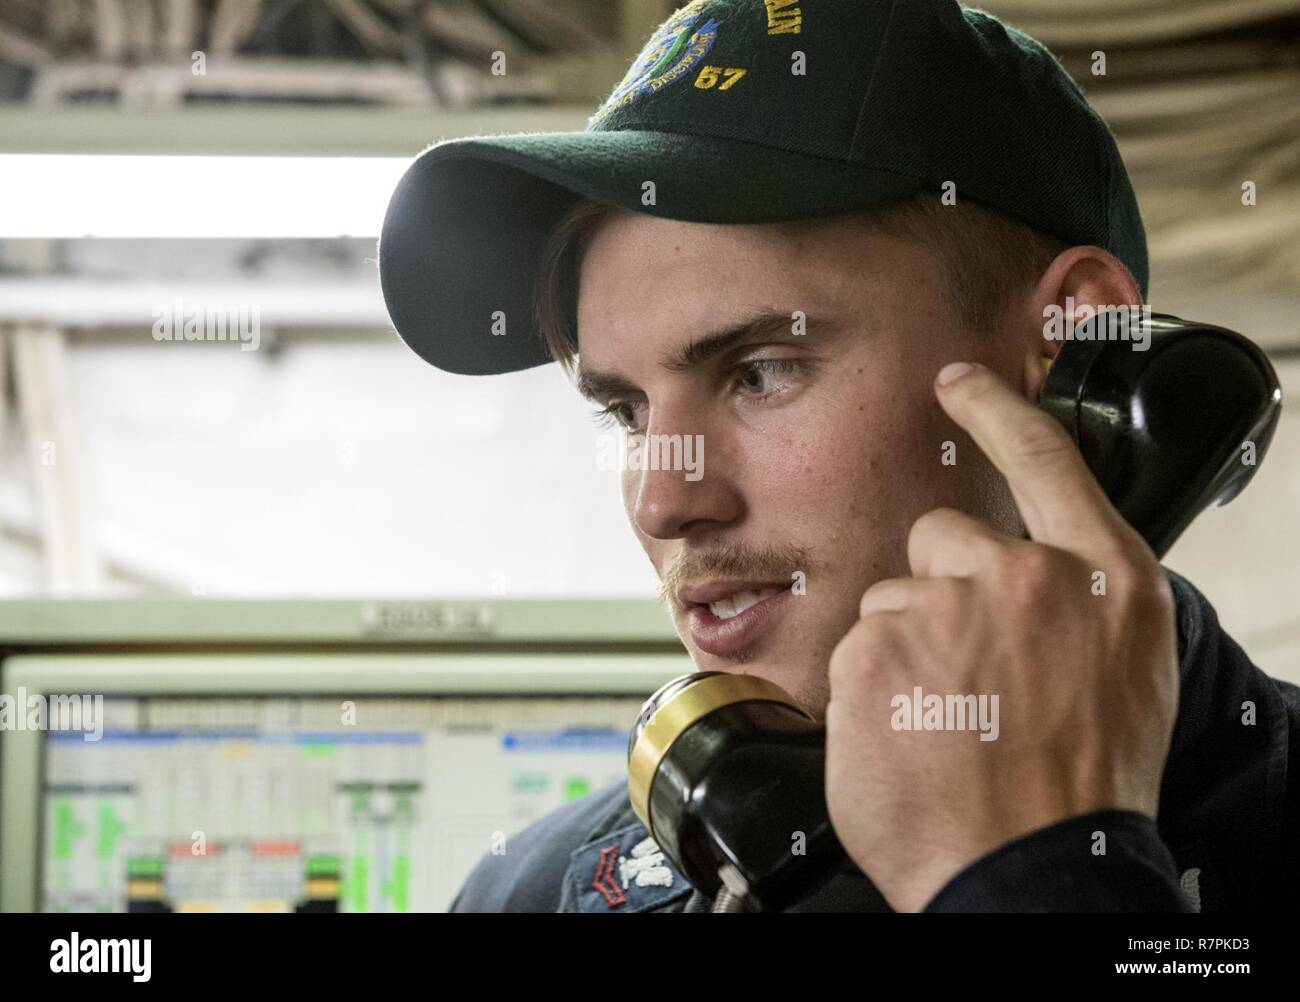 U.S. 7TH FLEET AREA OF OPERATIONS (March 20, 2017) Machinist’s Mate 2nd Class Dakota Anders, from Hartselle, Alabama, passes a message using an X5J telephone during an engineering training drill aboard Ticonderoga-class guided-missile cruiser USS Lake Champlain (CG 57). Lake Champlain is on a regularly scheduled Western Pacific deployment with the Carl Vinson Carrier Strike Group as part of the U.S. Pacific Fleet-led initiative to extend the command and control functions of the U.S. 3rd Fleet in the Indo-Asia-Pacific region. Navy aircraft carrier strike groups have patrolled the Indo-Asia-Paci Stock Photo